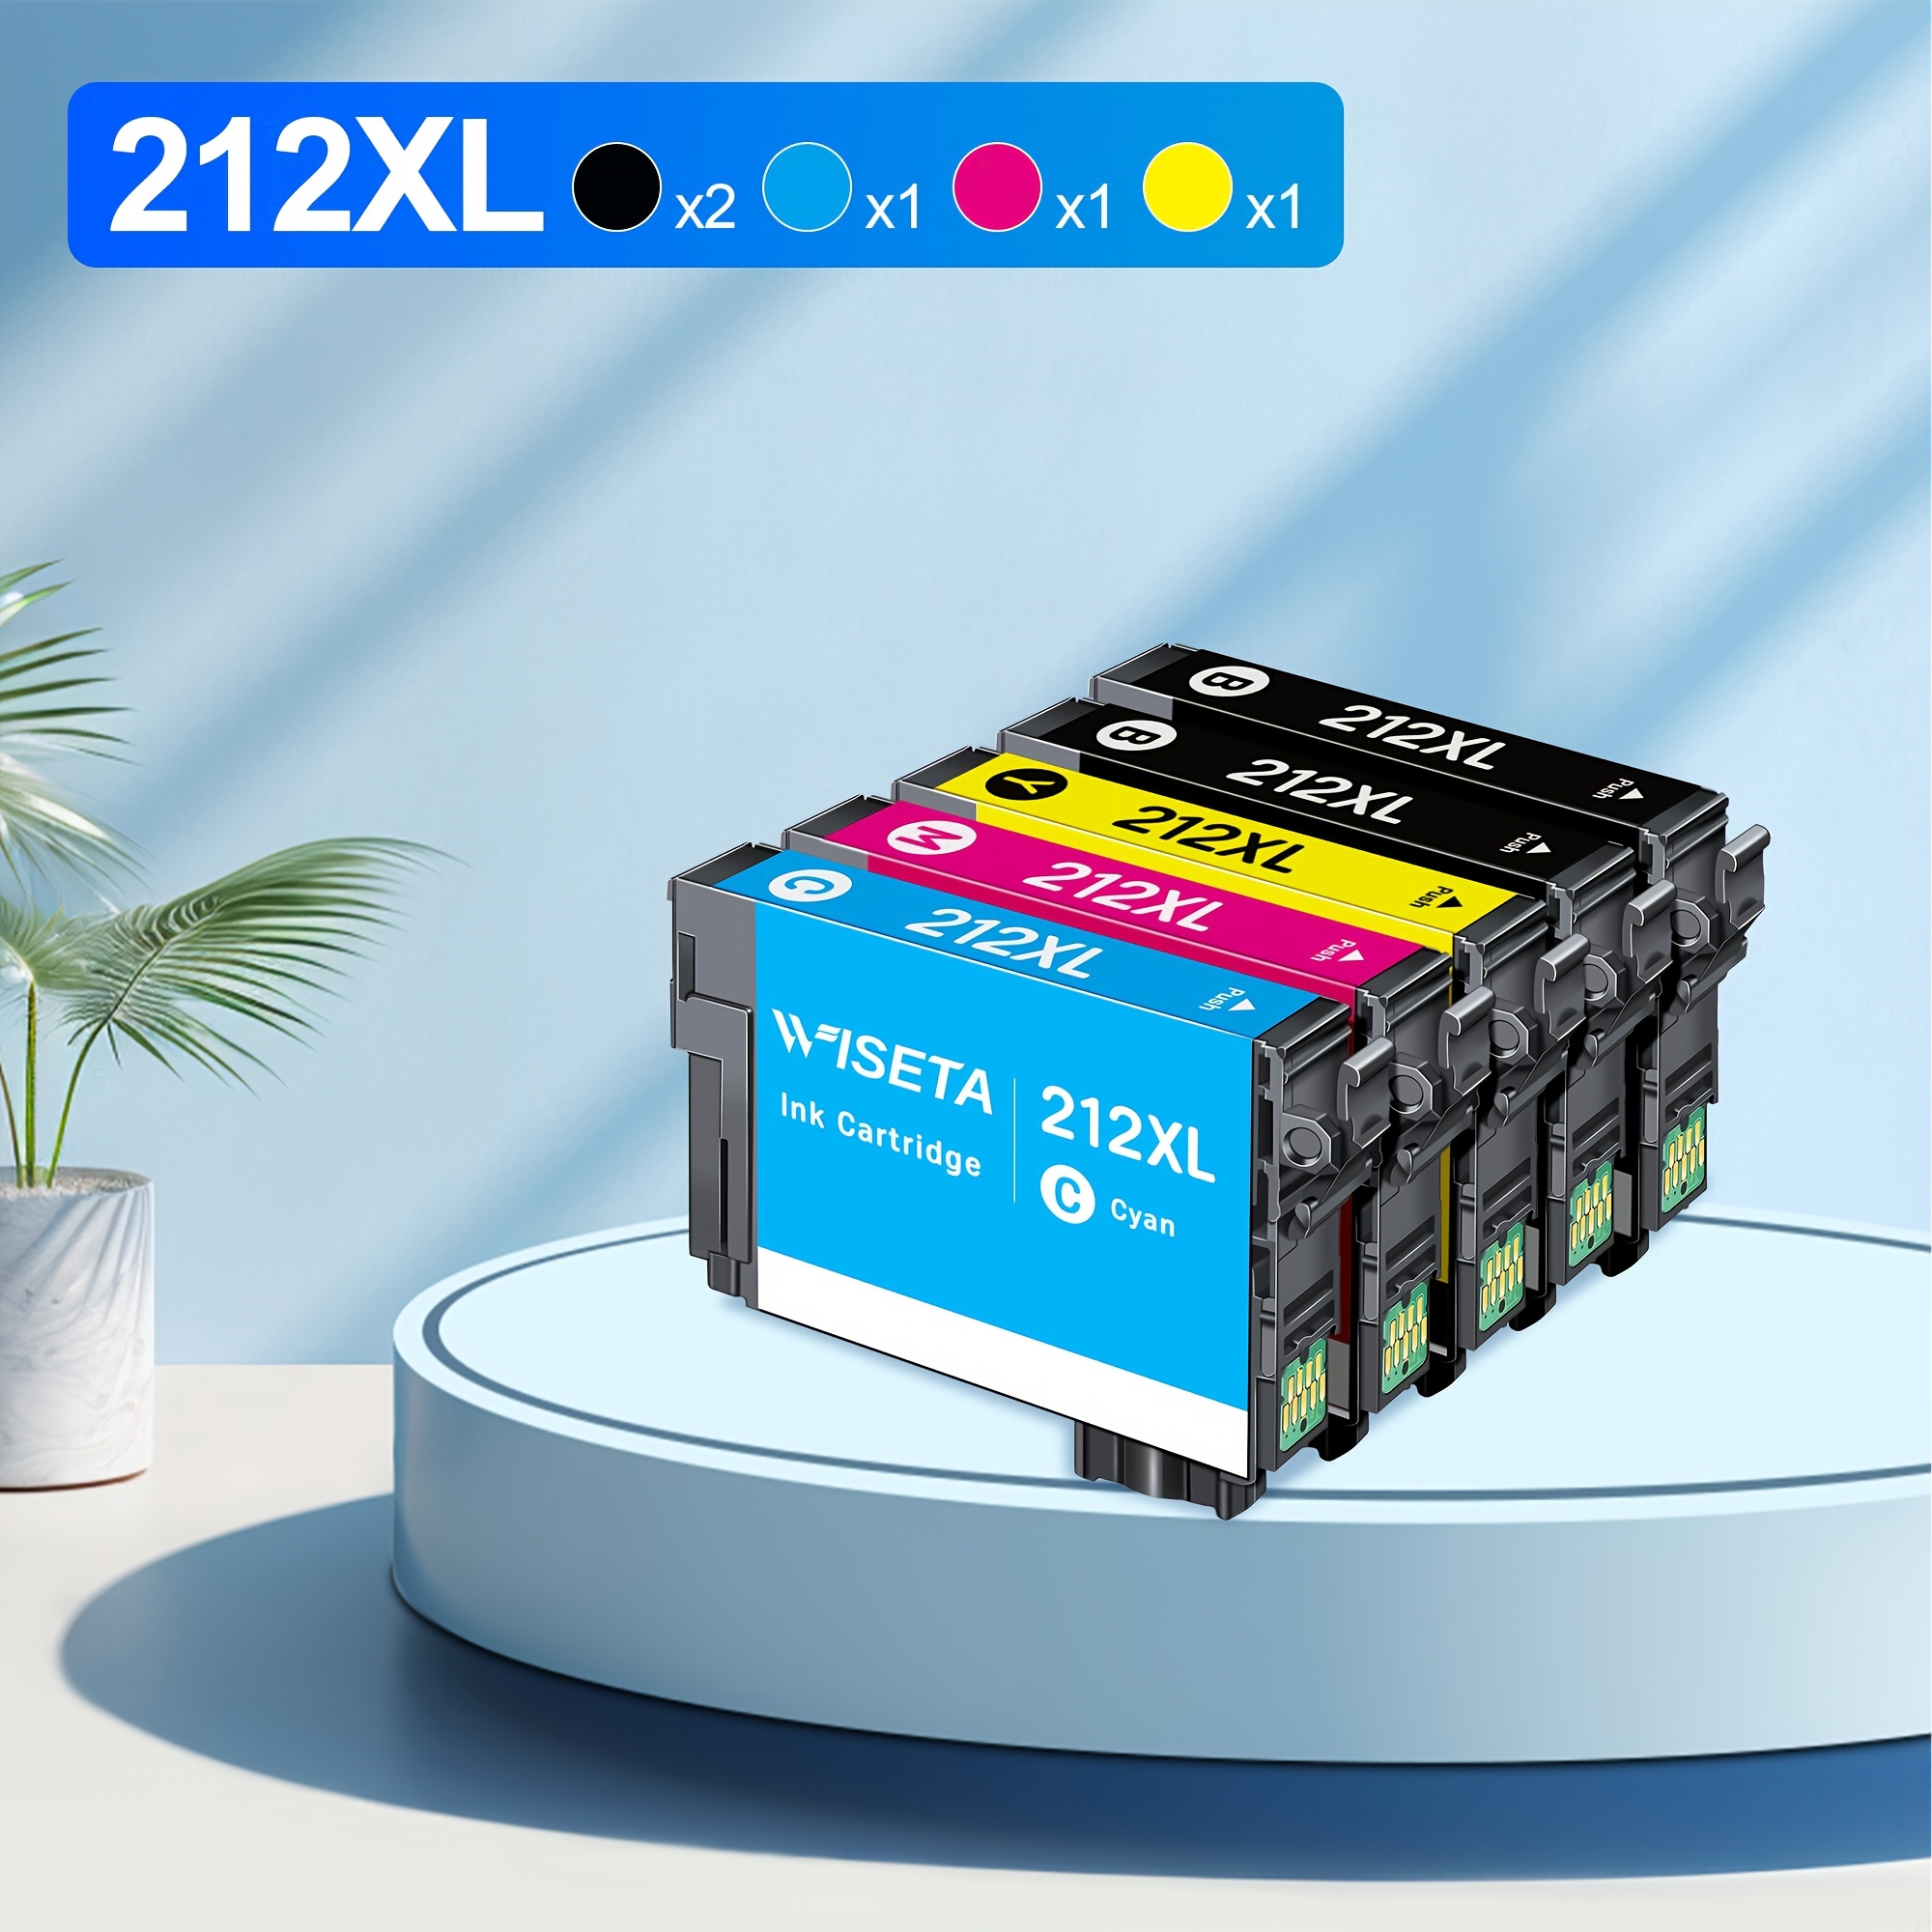 

5 Pack 212 Ink Cartridges Remanufactured Replacement For 212 212xl Workforce Wf-2850 Wf-2830 Expression Home Xp-4105 Xp-4100 Ink Cartridges For 212 Ink Cartridges